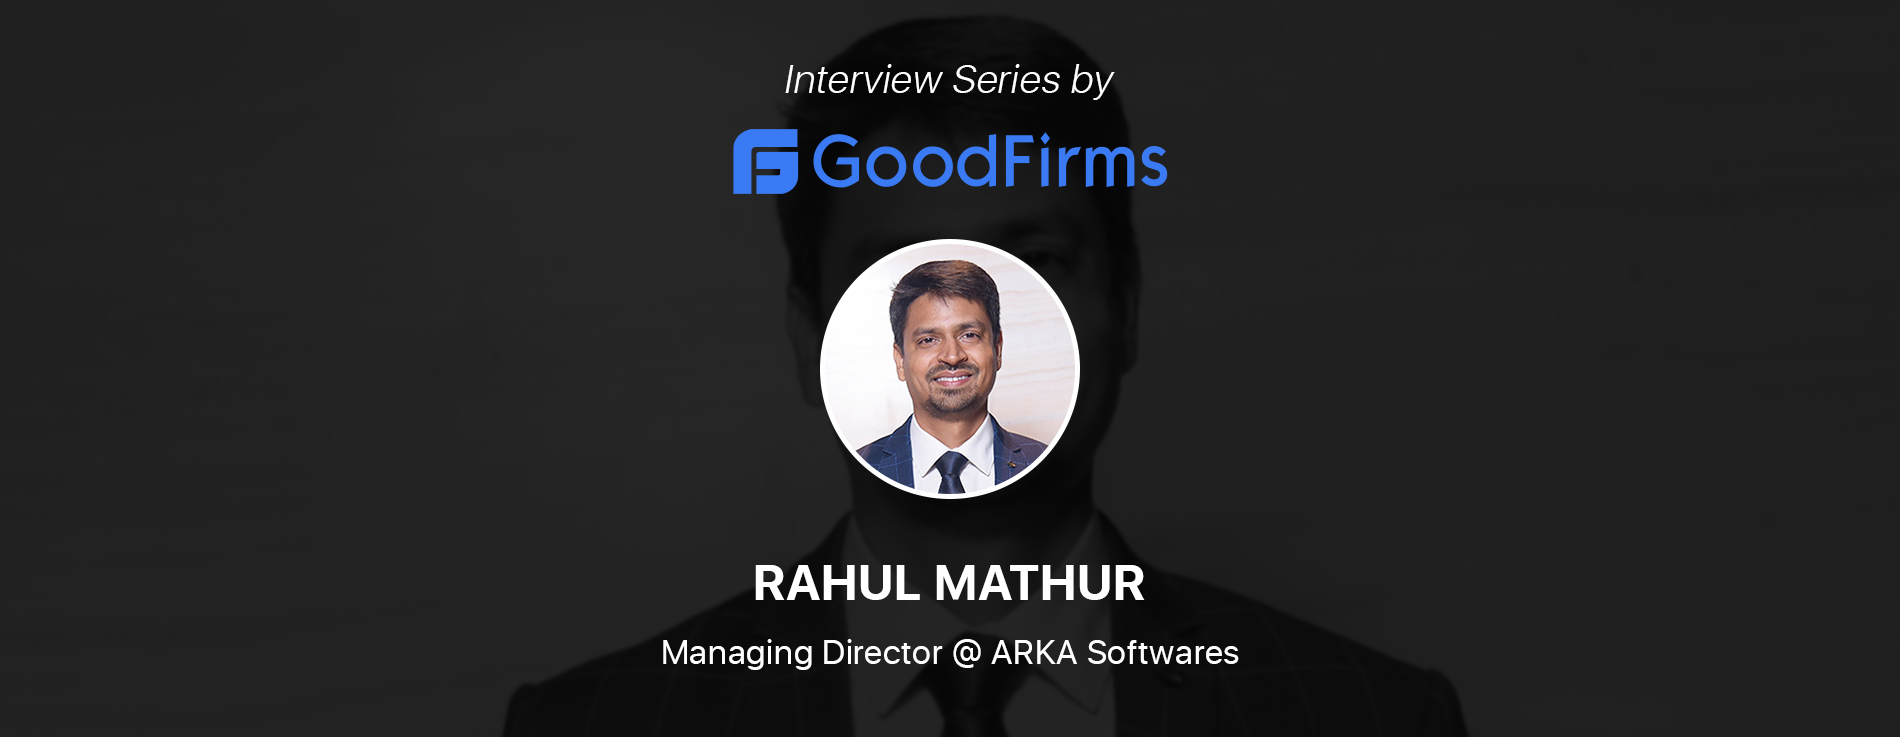 Interview Series by Goodfirms